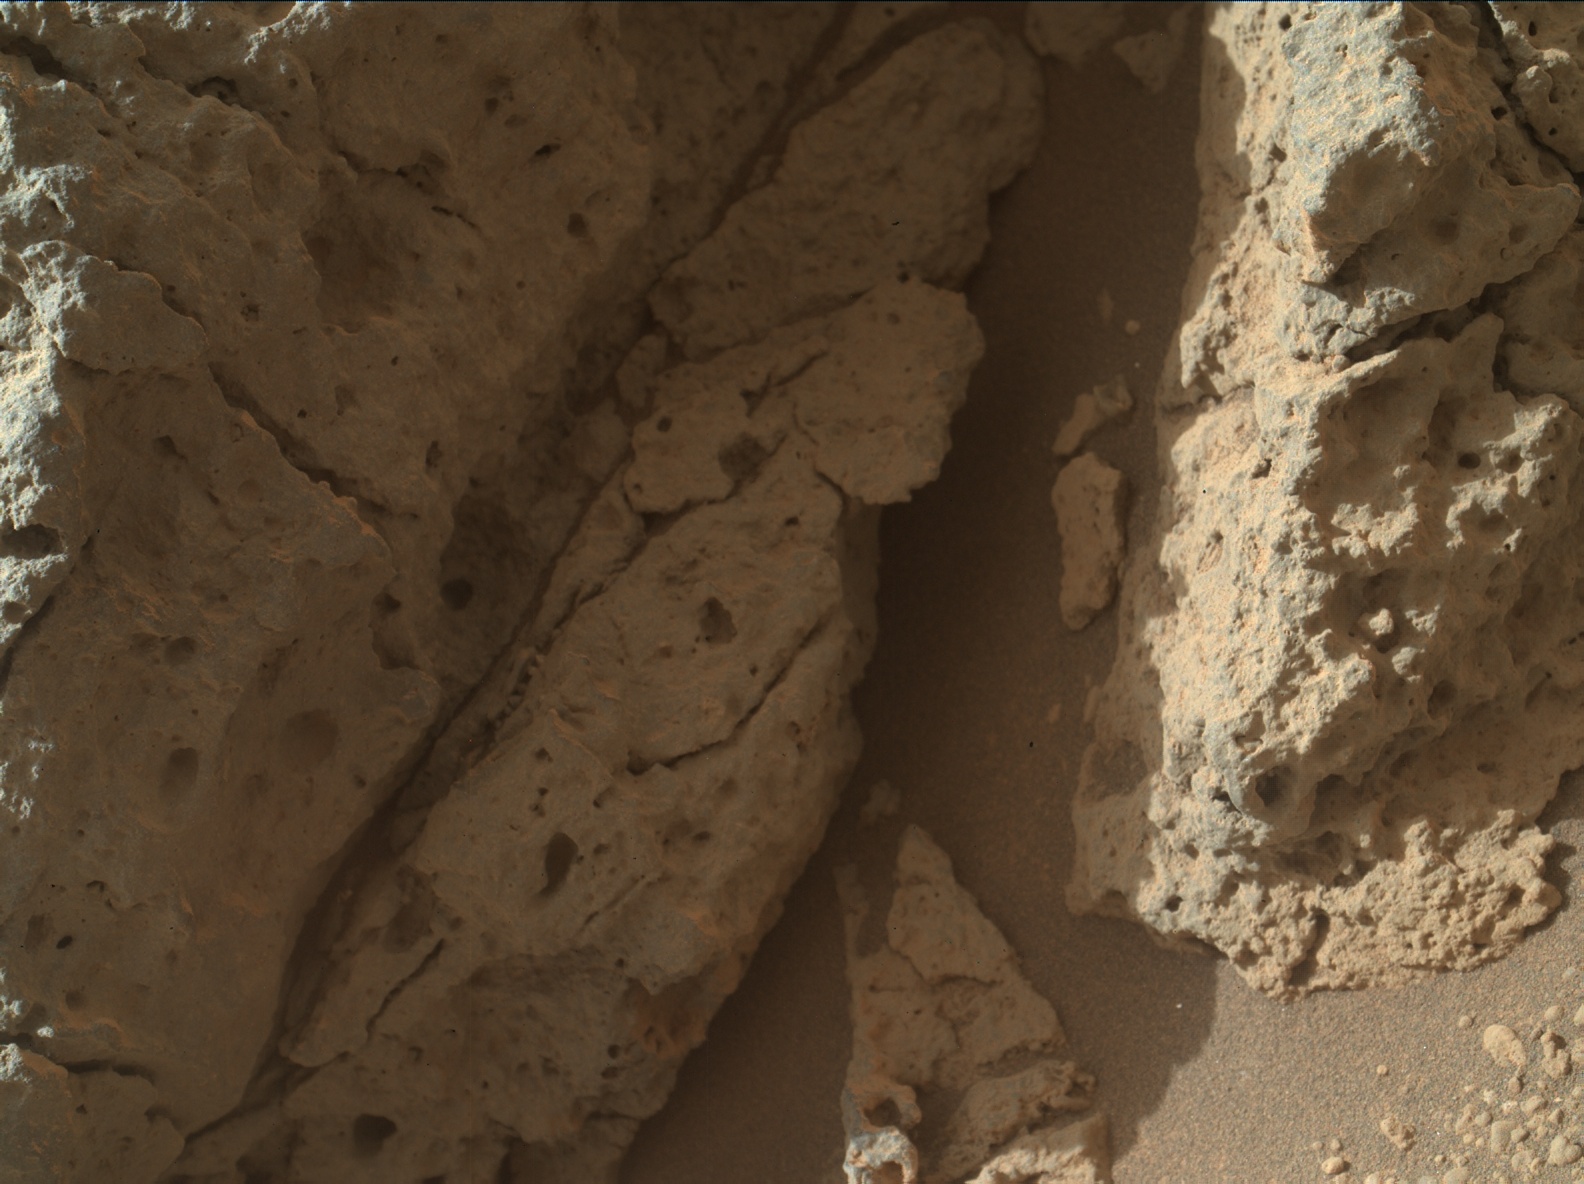 Nasa's Mars rover Curiosity acquired this image using its Mars Hand Lens Imager (MAHLI) on Sol 303